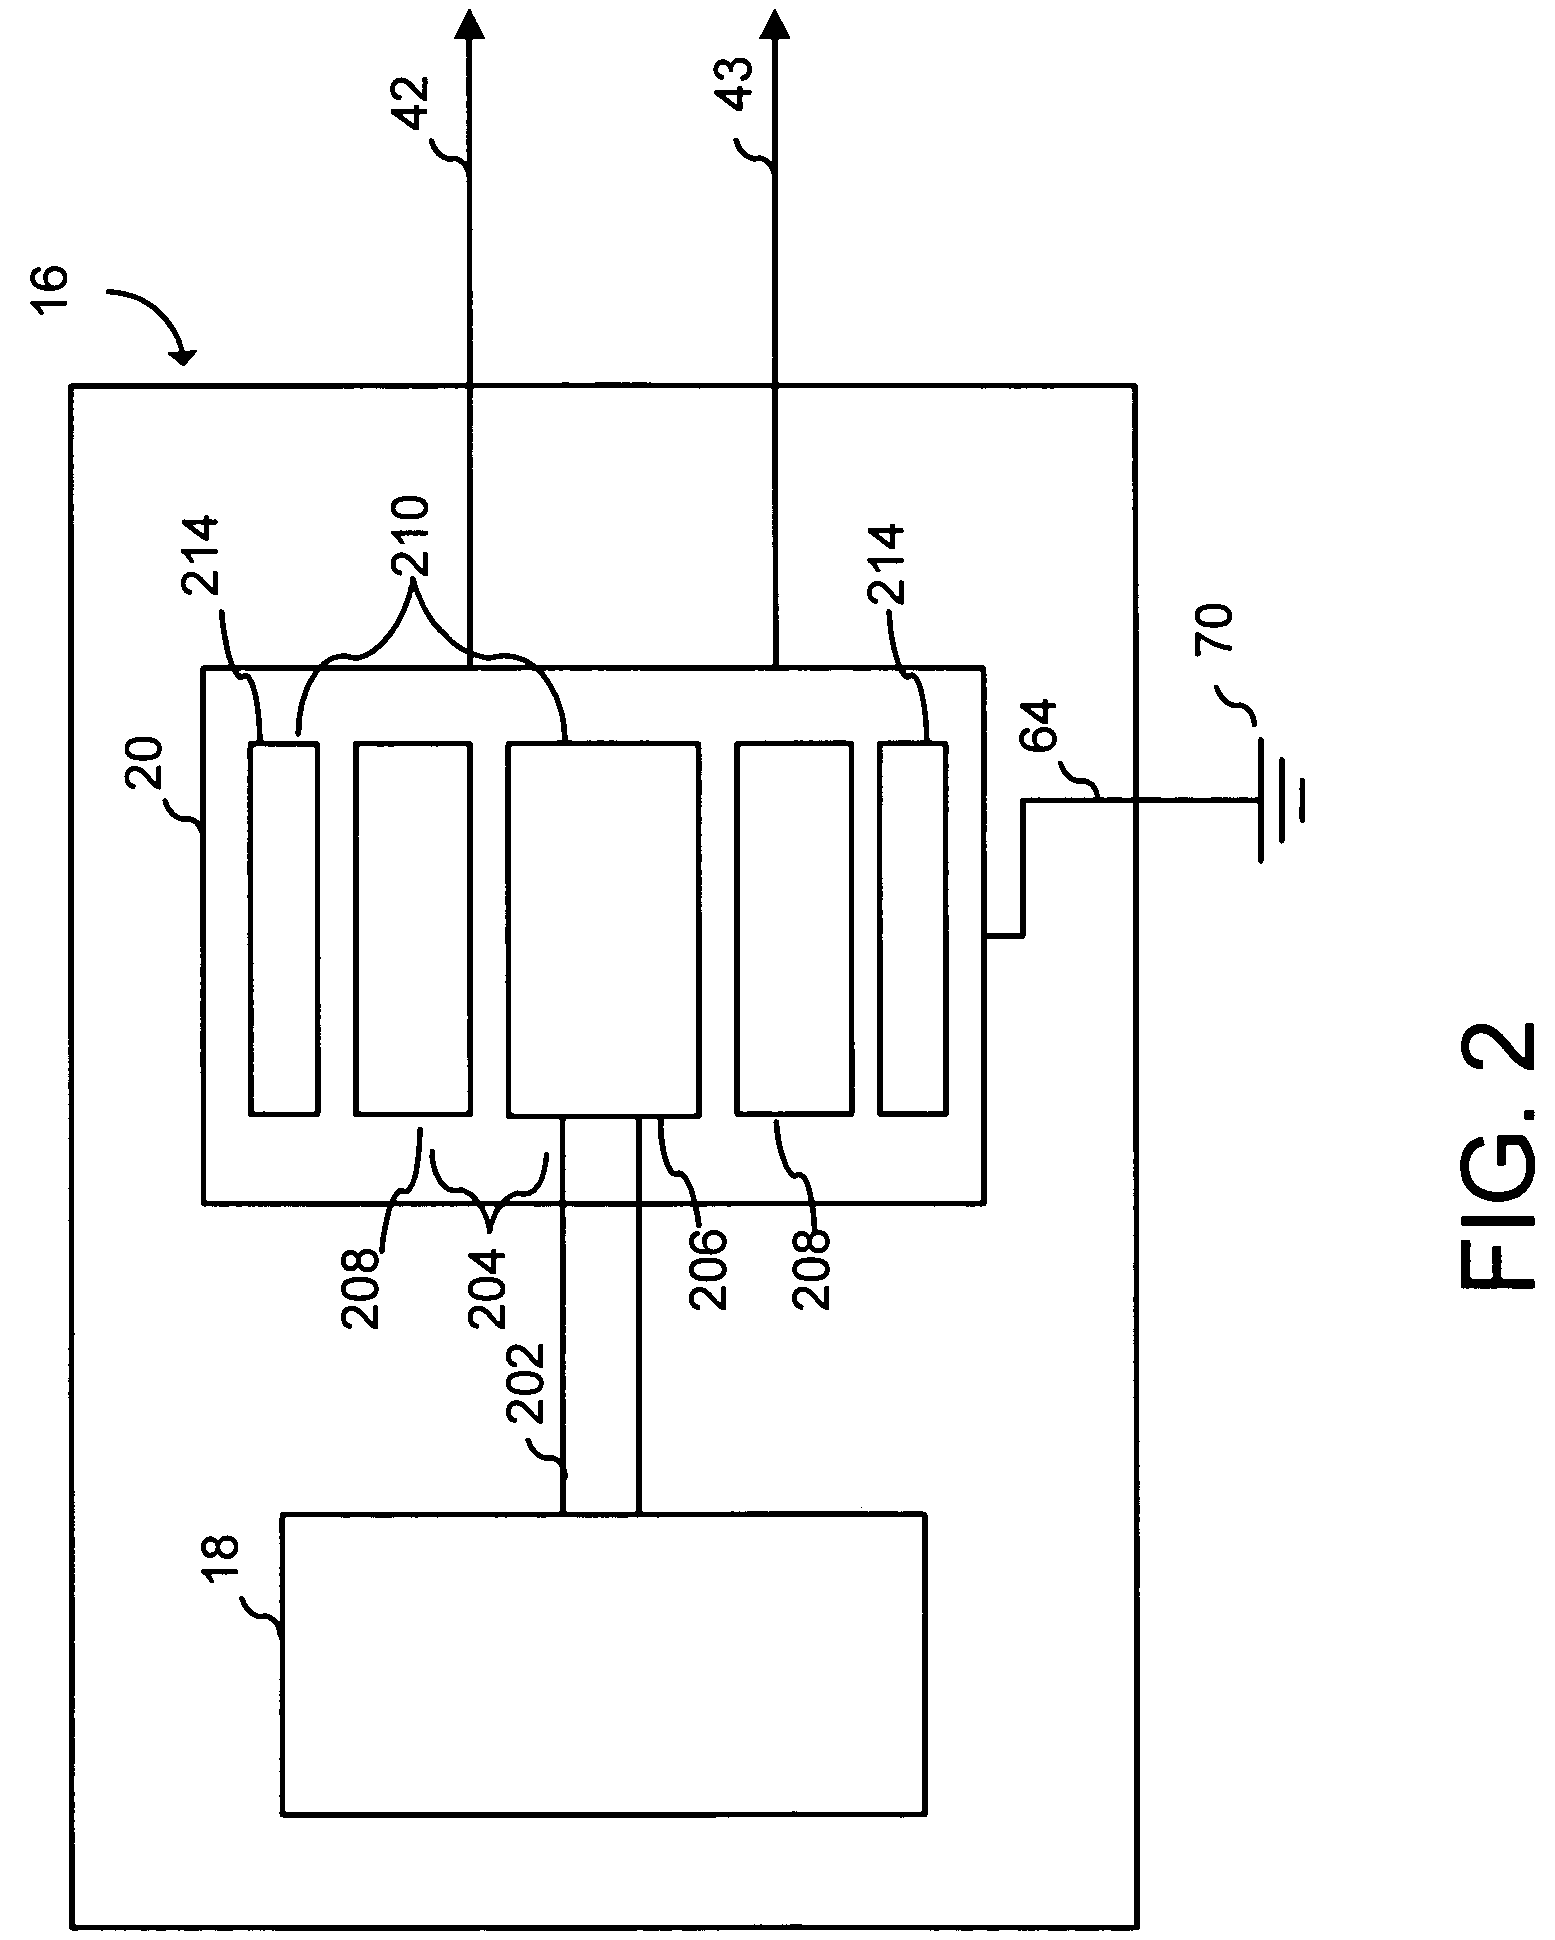 System and method for providing low voltage 3-phase power in a vehicle